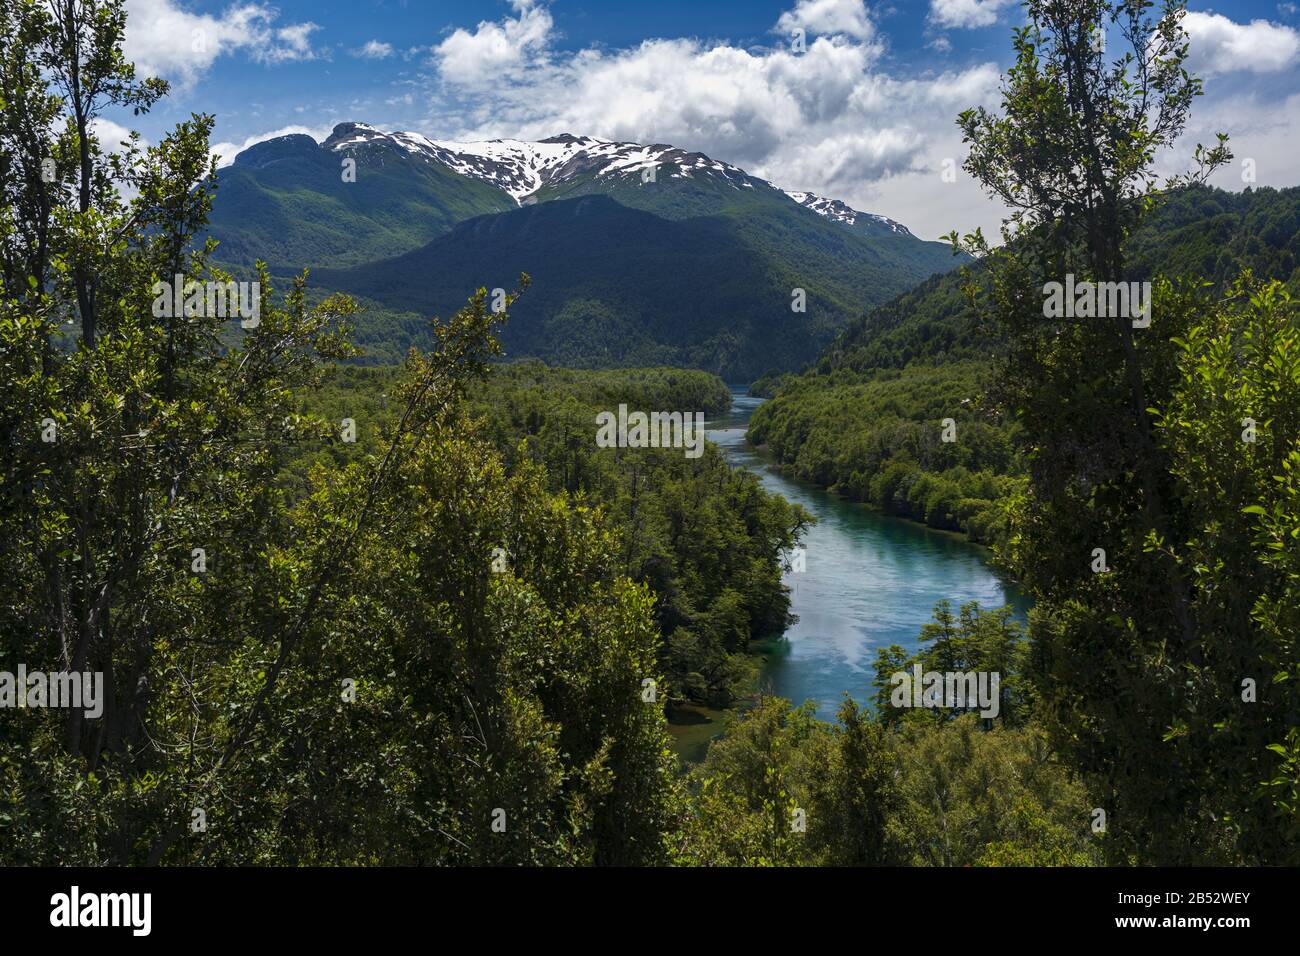 Los Arrayanes river meandering between forested hills at the foot of the Andes, Parque Nacional los Alerces, Patagonia Argentina Stock Photo